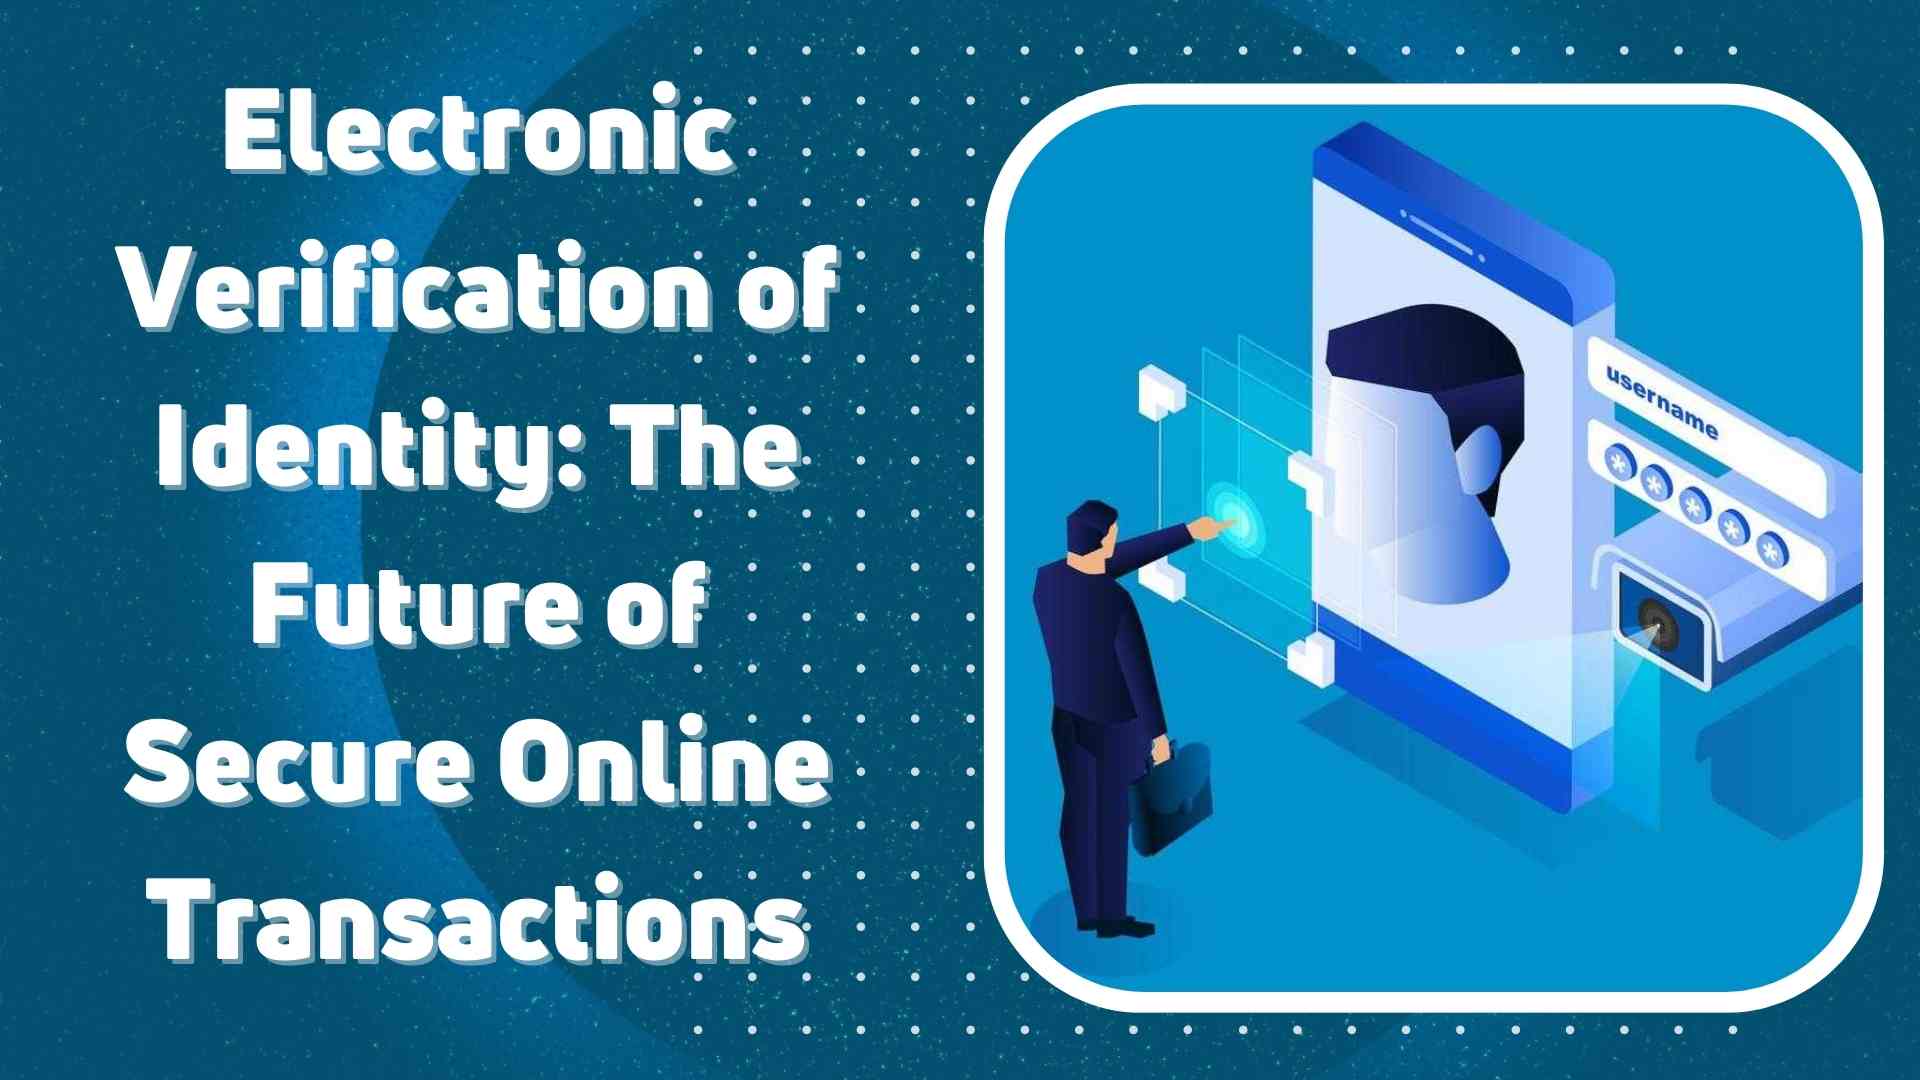 Electronic Verification of Identity: The Future of Secure Online Transactions